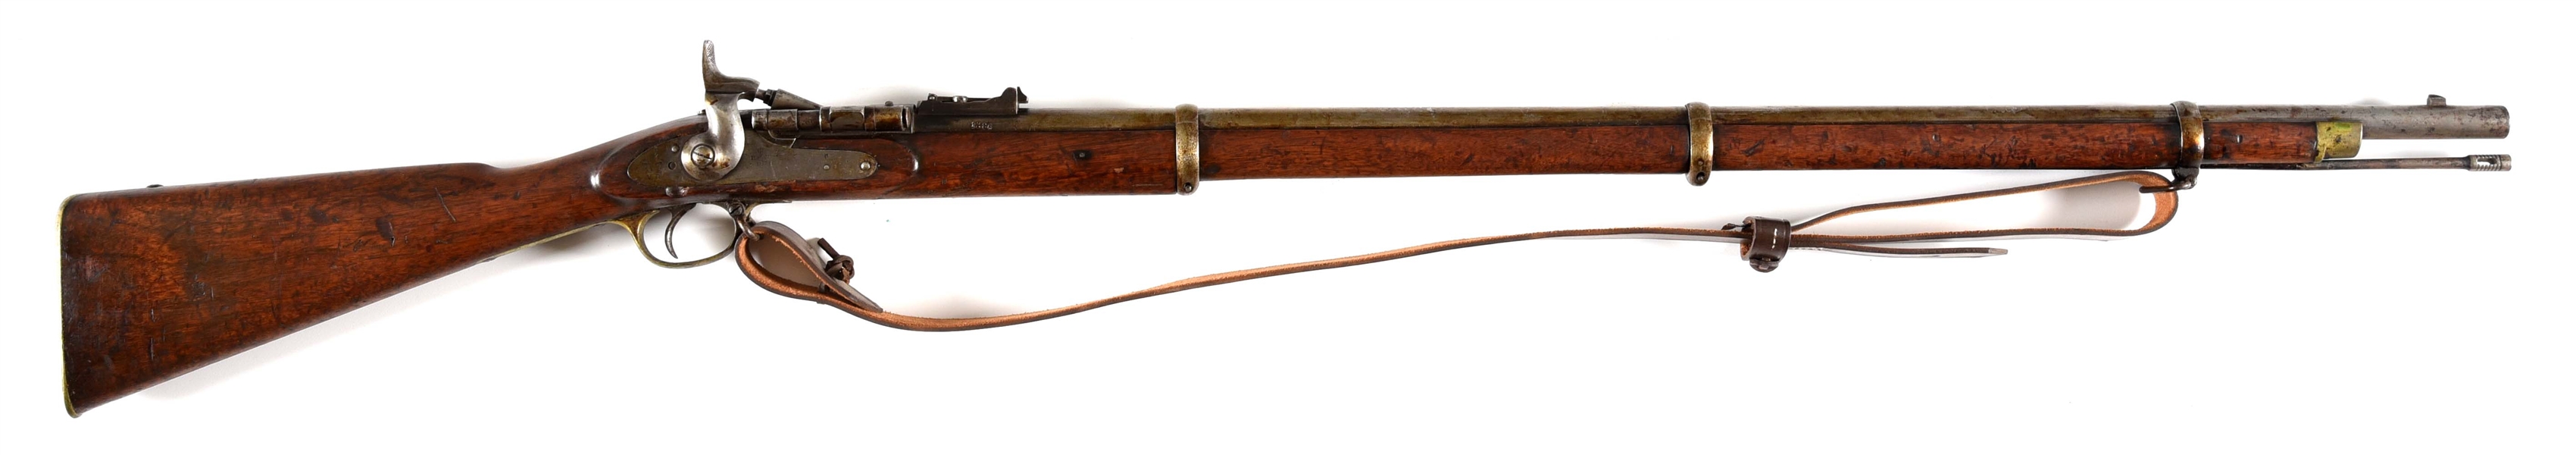 (A) B.S.A. MANUFACTURED SNIDER PATENT 1871 SINGLE SHOT RIFLE.